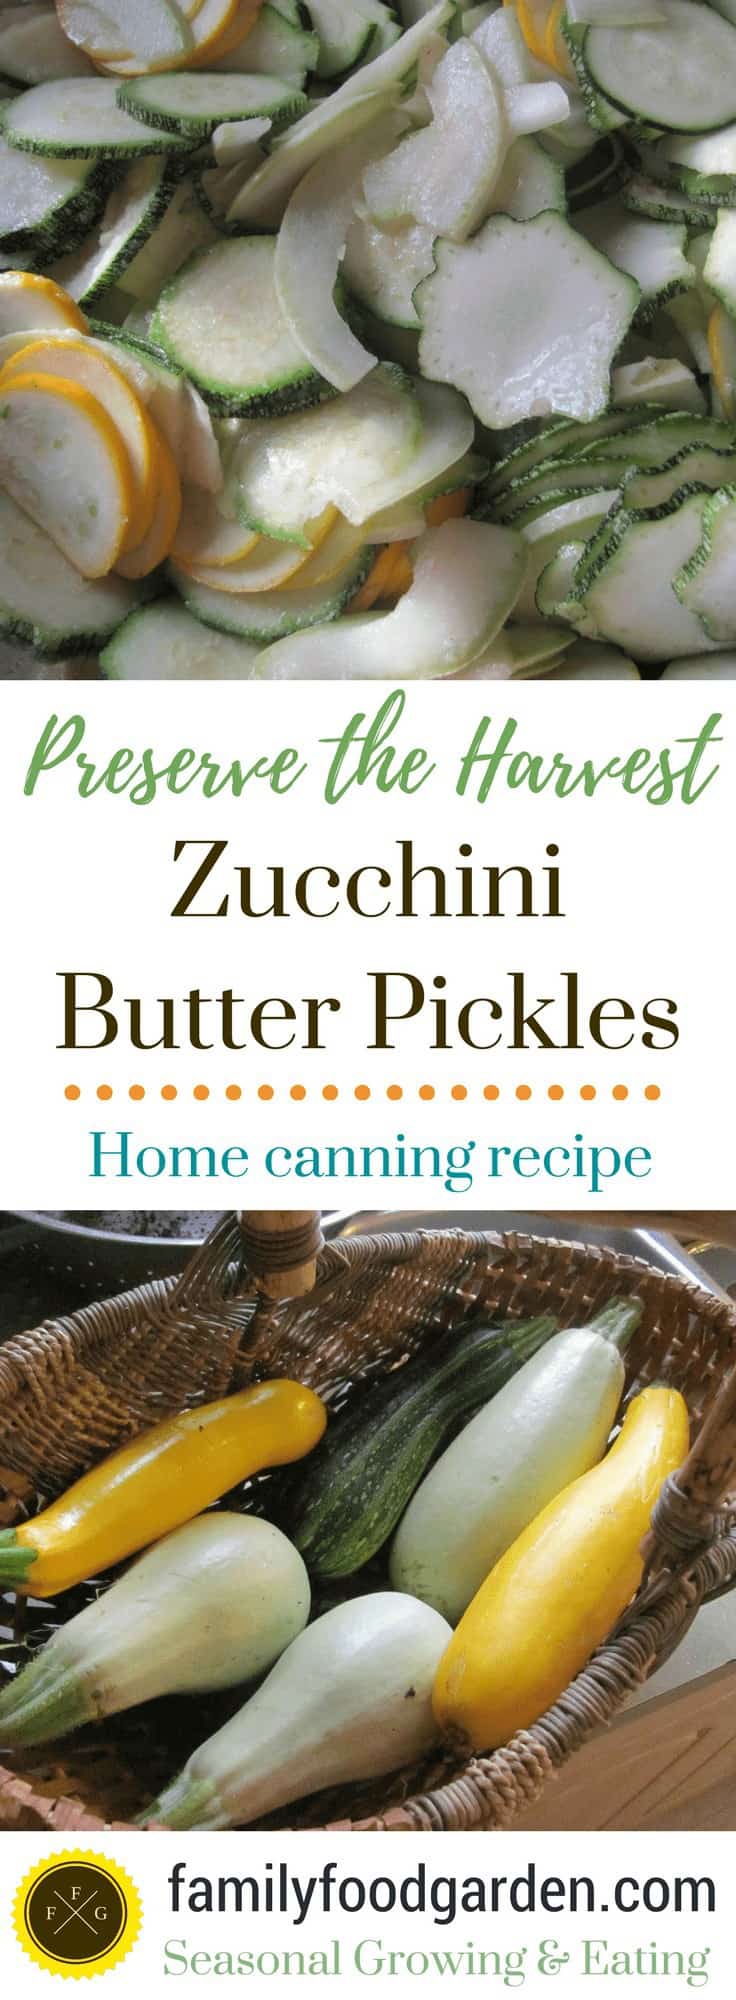 Preserve the harvest: Zucchini butter pickles (Home canning recipe)